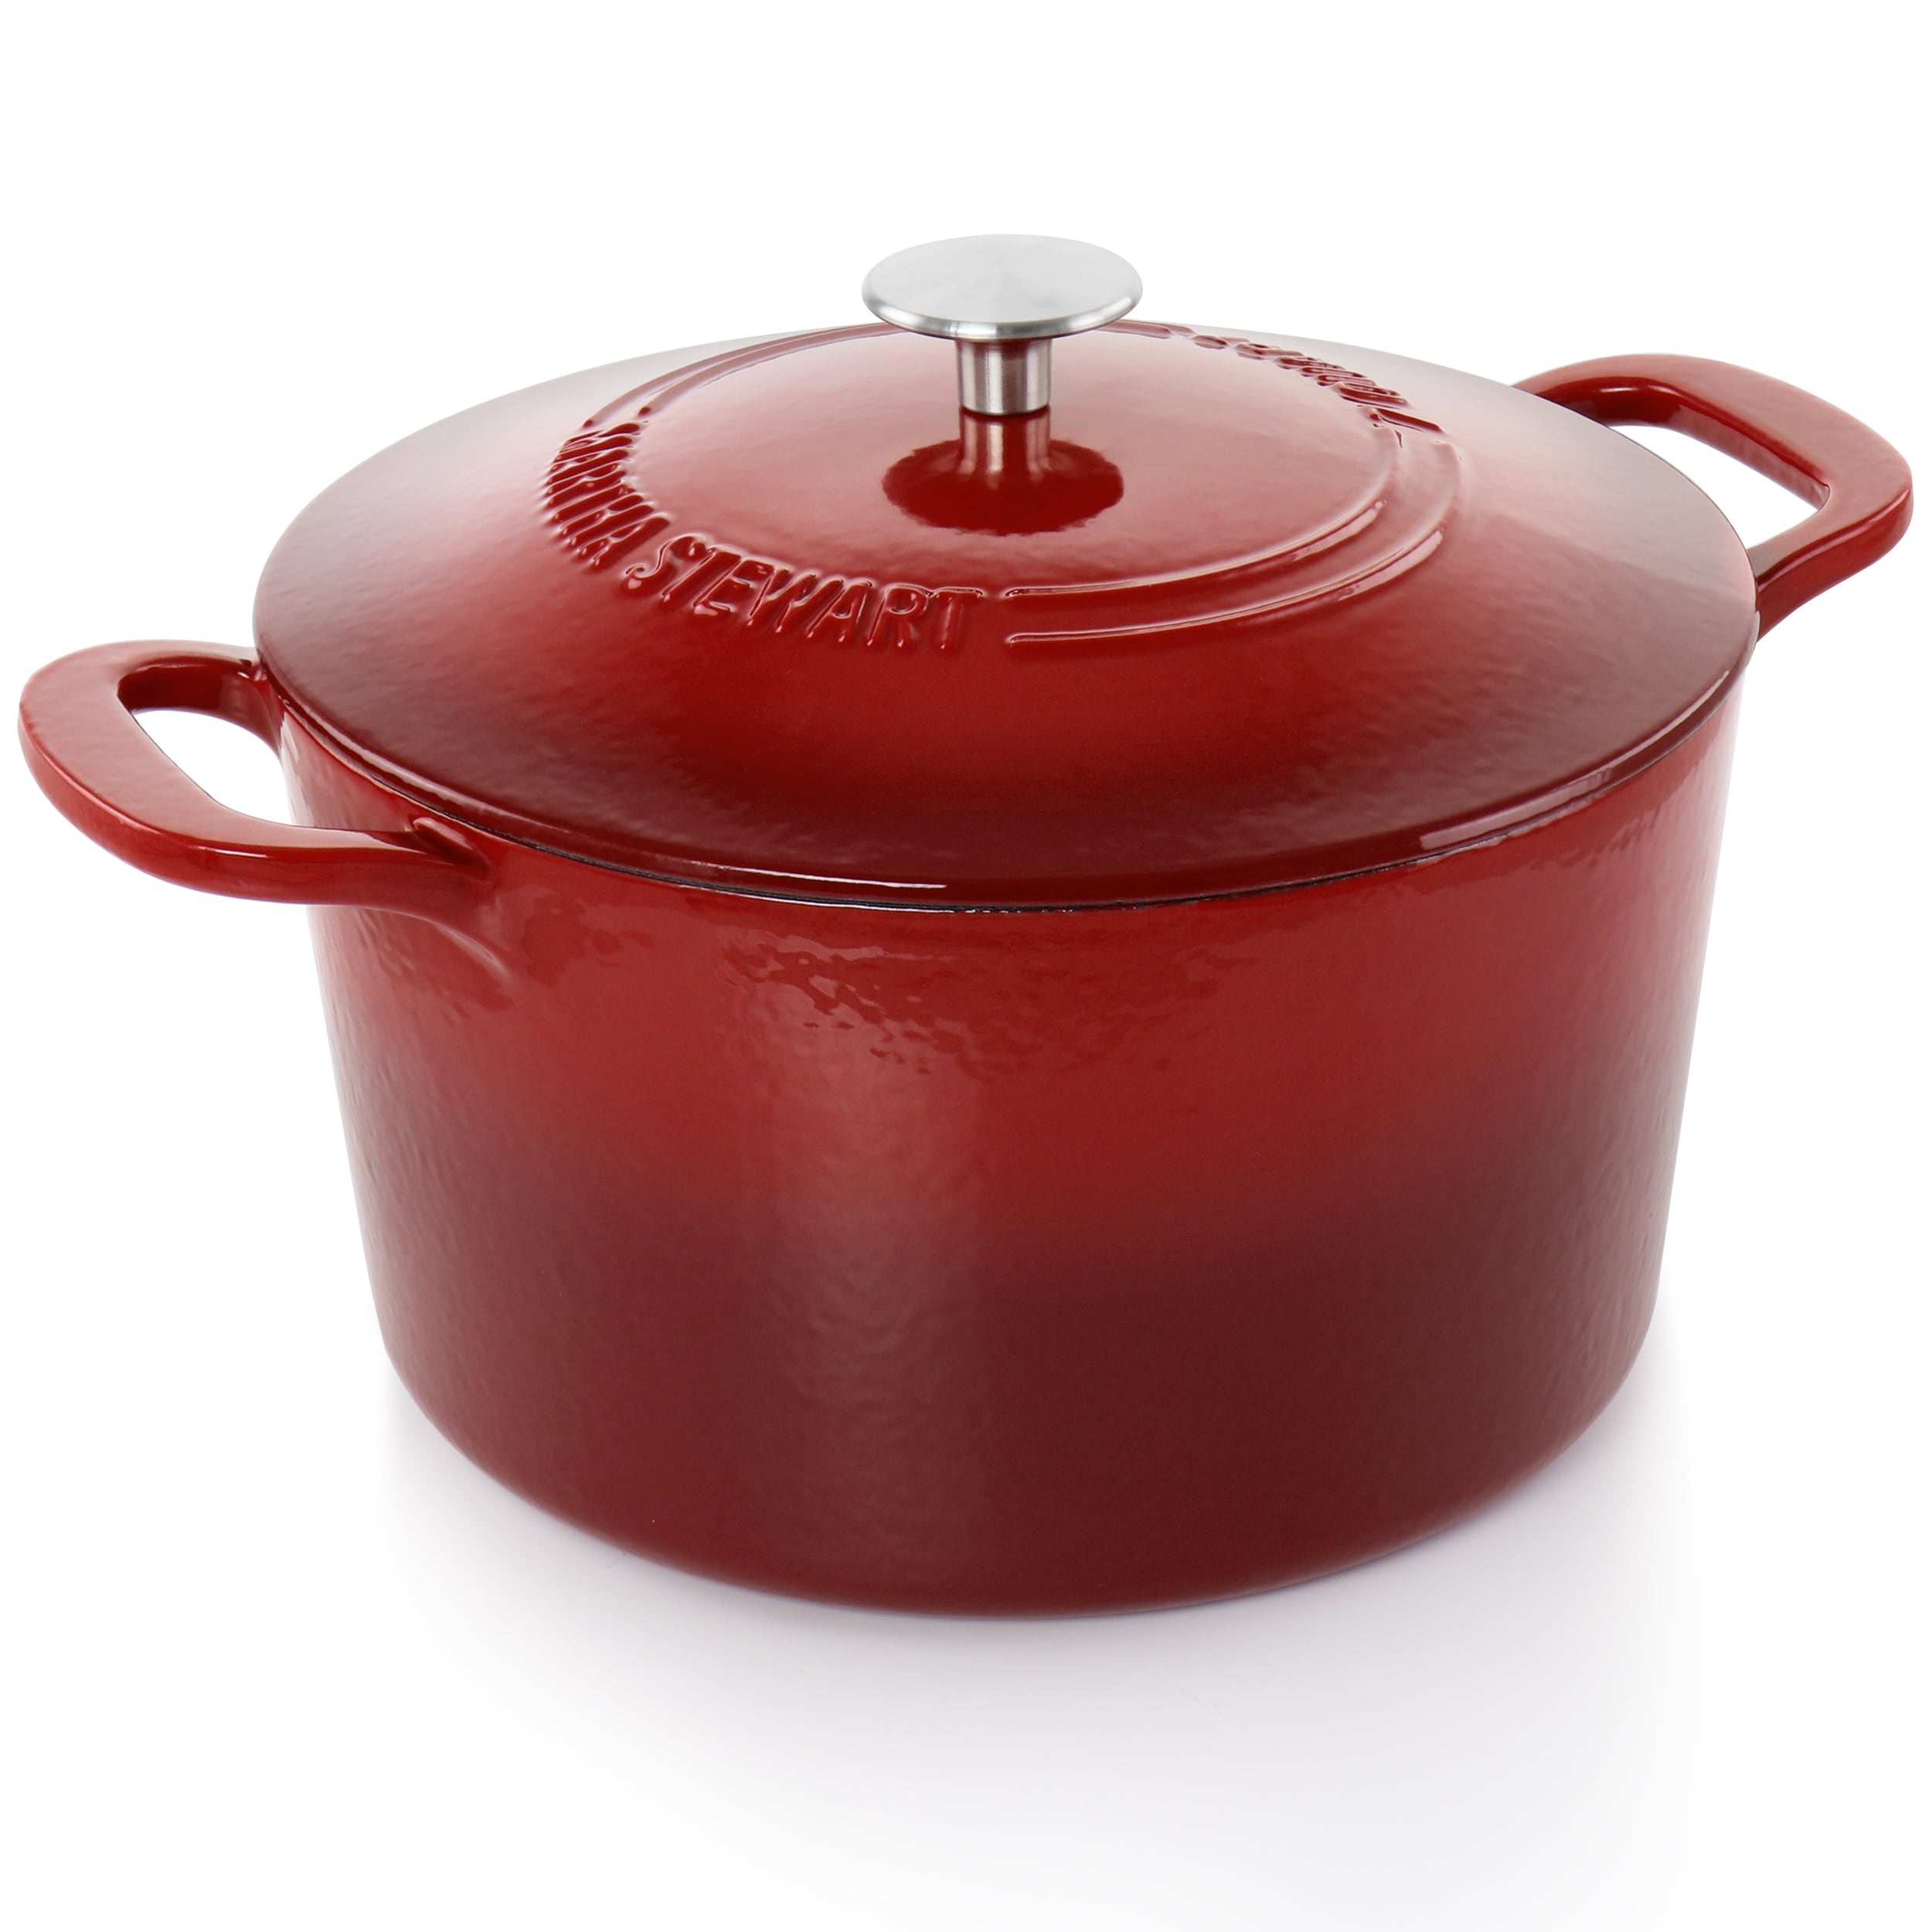 MARTHA STEWART ENAMELED CAST IRON OVAL RED DUTCH OVEN WITH LID